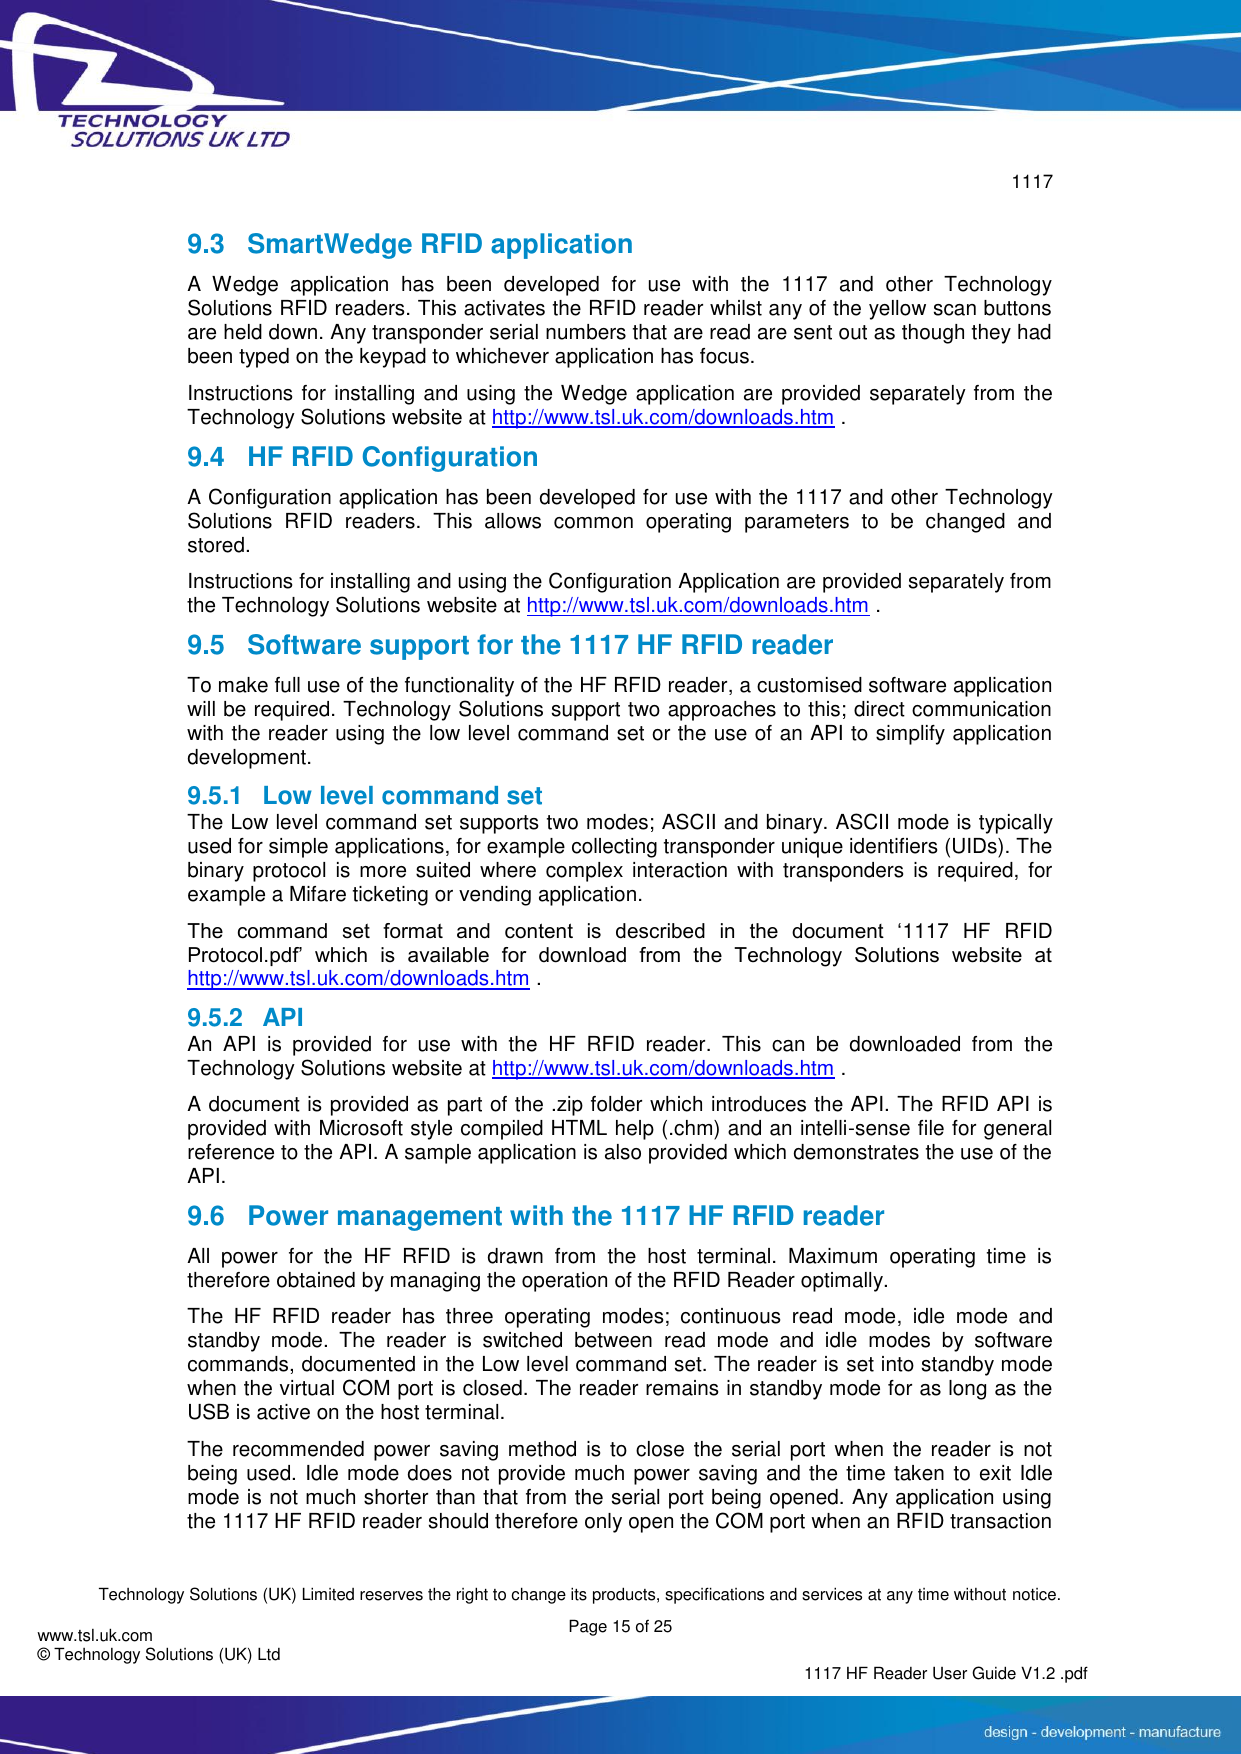        1117  Technology Solutions (UK) Limited reserves the right to change its products, specifications and services at any time without notice. Page 15 of 25 1117 HF Reader User Guide V1.2 .pdf www.tsl.uk.com © Technology Solutions (UK) Ltd   9.3  SmartWedge RFID application A  Wedge  application  has  been  developed  for  use  with  the  1117  and  other  Technology Solutions RFID readers. This activates the RFID reader whilst any of the yellow scan buttons are held down. Any transponder serial numbers that are read are sent out as though they had been typed on the keypad to whichever application has focus. Instructions for installing and using the Wedge application are provided separately from the Technology Solutions website at http://www.tsl.uk.com/downloads.htm . 9.4 HF RFID Configuration A Configuration application has been developed for use with the 1117 and other Technology Solutions  RFID  readers.  This  allows  common  operating  parameters  to  be  changed  and stored. Instructions for installing and using the Configuration Application are provided separately from the Technology Solutions website at http://www.tsl.uk.com/downloads.htm . 9.5  Software support for the 1117 HF RFID reader To make full use of the functionality of the HF RFID reader, a customised software application will be required. Technology Solutions support two approaches to this; direct communication with the reader using the low level command set or the use of an API to simplify application development.  9.5.1  Low level command set The Low level command set supports two modes; ASCII and binary. ASCII mode is typically used for simple applications, for example collecting transponder unique identifiers (UIDs). The binary protocol  is more  suited where  complex  interaction  with  transponders  is  required,  for example a Mifare ticketing or vending application. The  command  set  format  and  content  is  described  in  the  document  ‘1117  HF  RFID Protocol.pdf’  which  is  available  for  download  from  the  Technology  Solutions  website  at http://www.tsl.uk.com/downloads.htm . 9.5.2  API An  API  is  provided  for  use  with  the  HF  RFID  reader.  This  can  be  downloaded  from  the Technology Solutions website at http://www.tsl.uk.com/downloads.htm . A document is provided as part of the .zip folder which introduces the API. The RFID API is provided with Microsoft style compiled HTML help (.chm) and an intelli-sense file for general reference to the API. A sample application is also provided which demonstrates the use of the API. 9.6  Power management with the 1117 HF RFID reader All  power  for  the  HF  RFID  is  drawn  from  the  host  terminal.  Maximum  operating  time  is therefore obtained by managing the operation of the RFID Reader optimally. The  HF  RFID  reader  has  three  operating  modes;  continuous  read  mode,  idle  mode  and standby  mode.  The  reader  is  switched  between  read  mode  and  idle  modes  by  software commands, documented in the Low level command set. The reader is set into standby mode when the virtual COM port is closed. The reader remains in standby mode for as long as the USB is active on the host terminal. The recommended power  saving  method  is  to close the serial  port  when the reader  is  not being used. Idle mode does not provide much power saving and the time taken to exit Idle mode is not much shorter than that from the serial port being opened. Any application using the 1117 HF RFID reader should therefore only open the COM port when an RFID transaction 